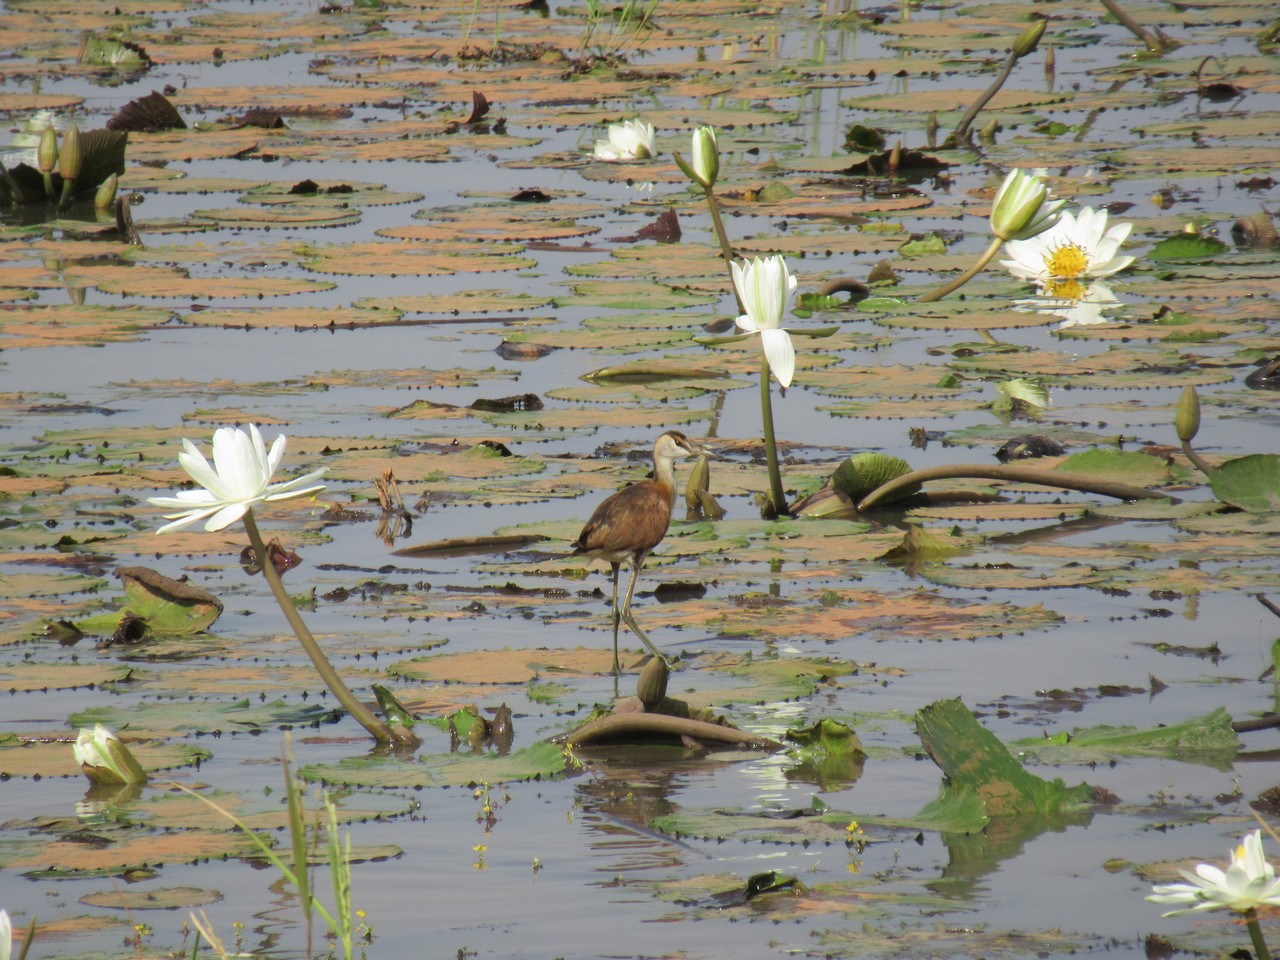 The waterlilies support all sorts of life.